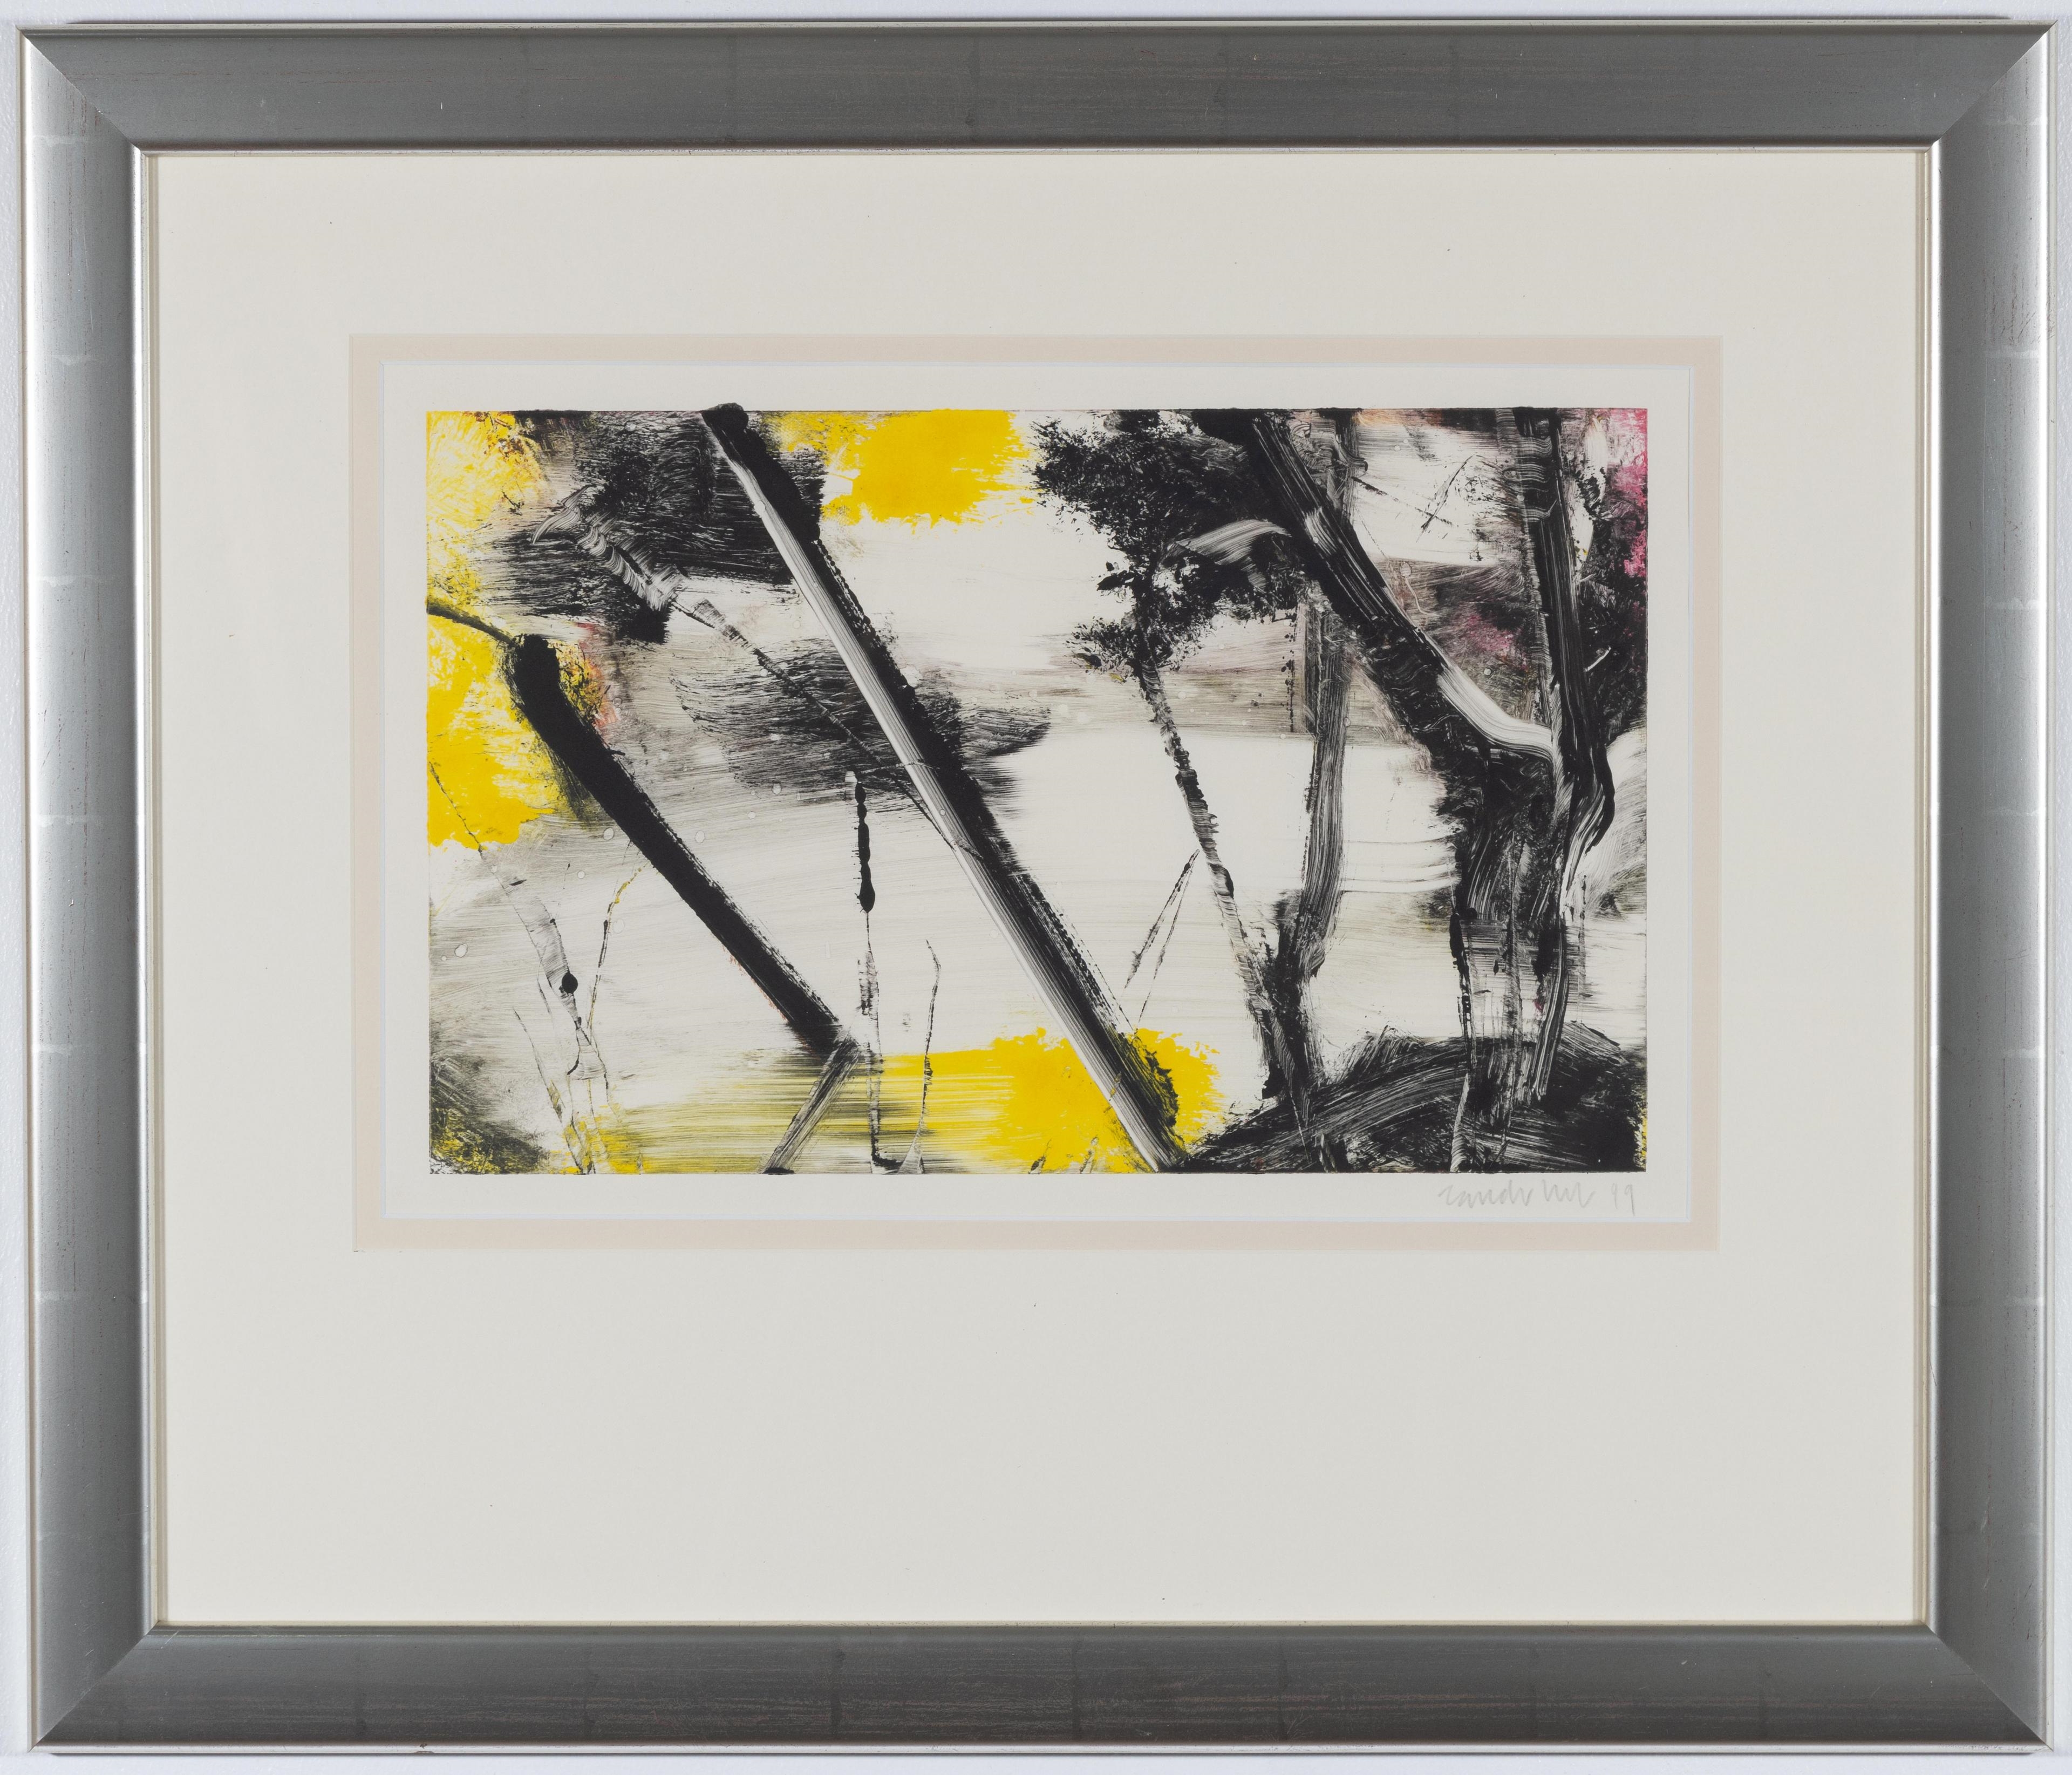 Artwork by Robert Zandvliet, Untitled from 'The Varick Series', Made of monotype on wove paper